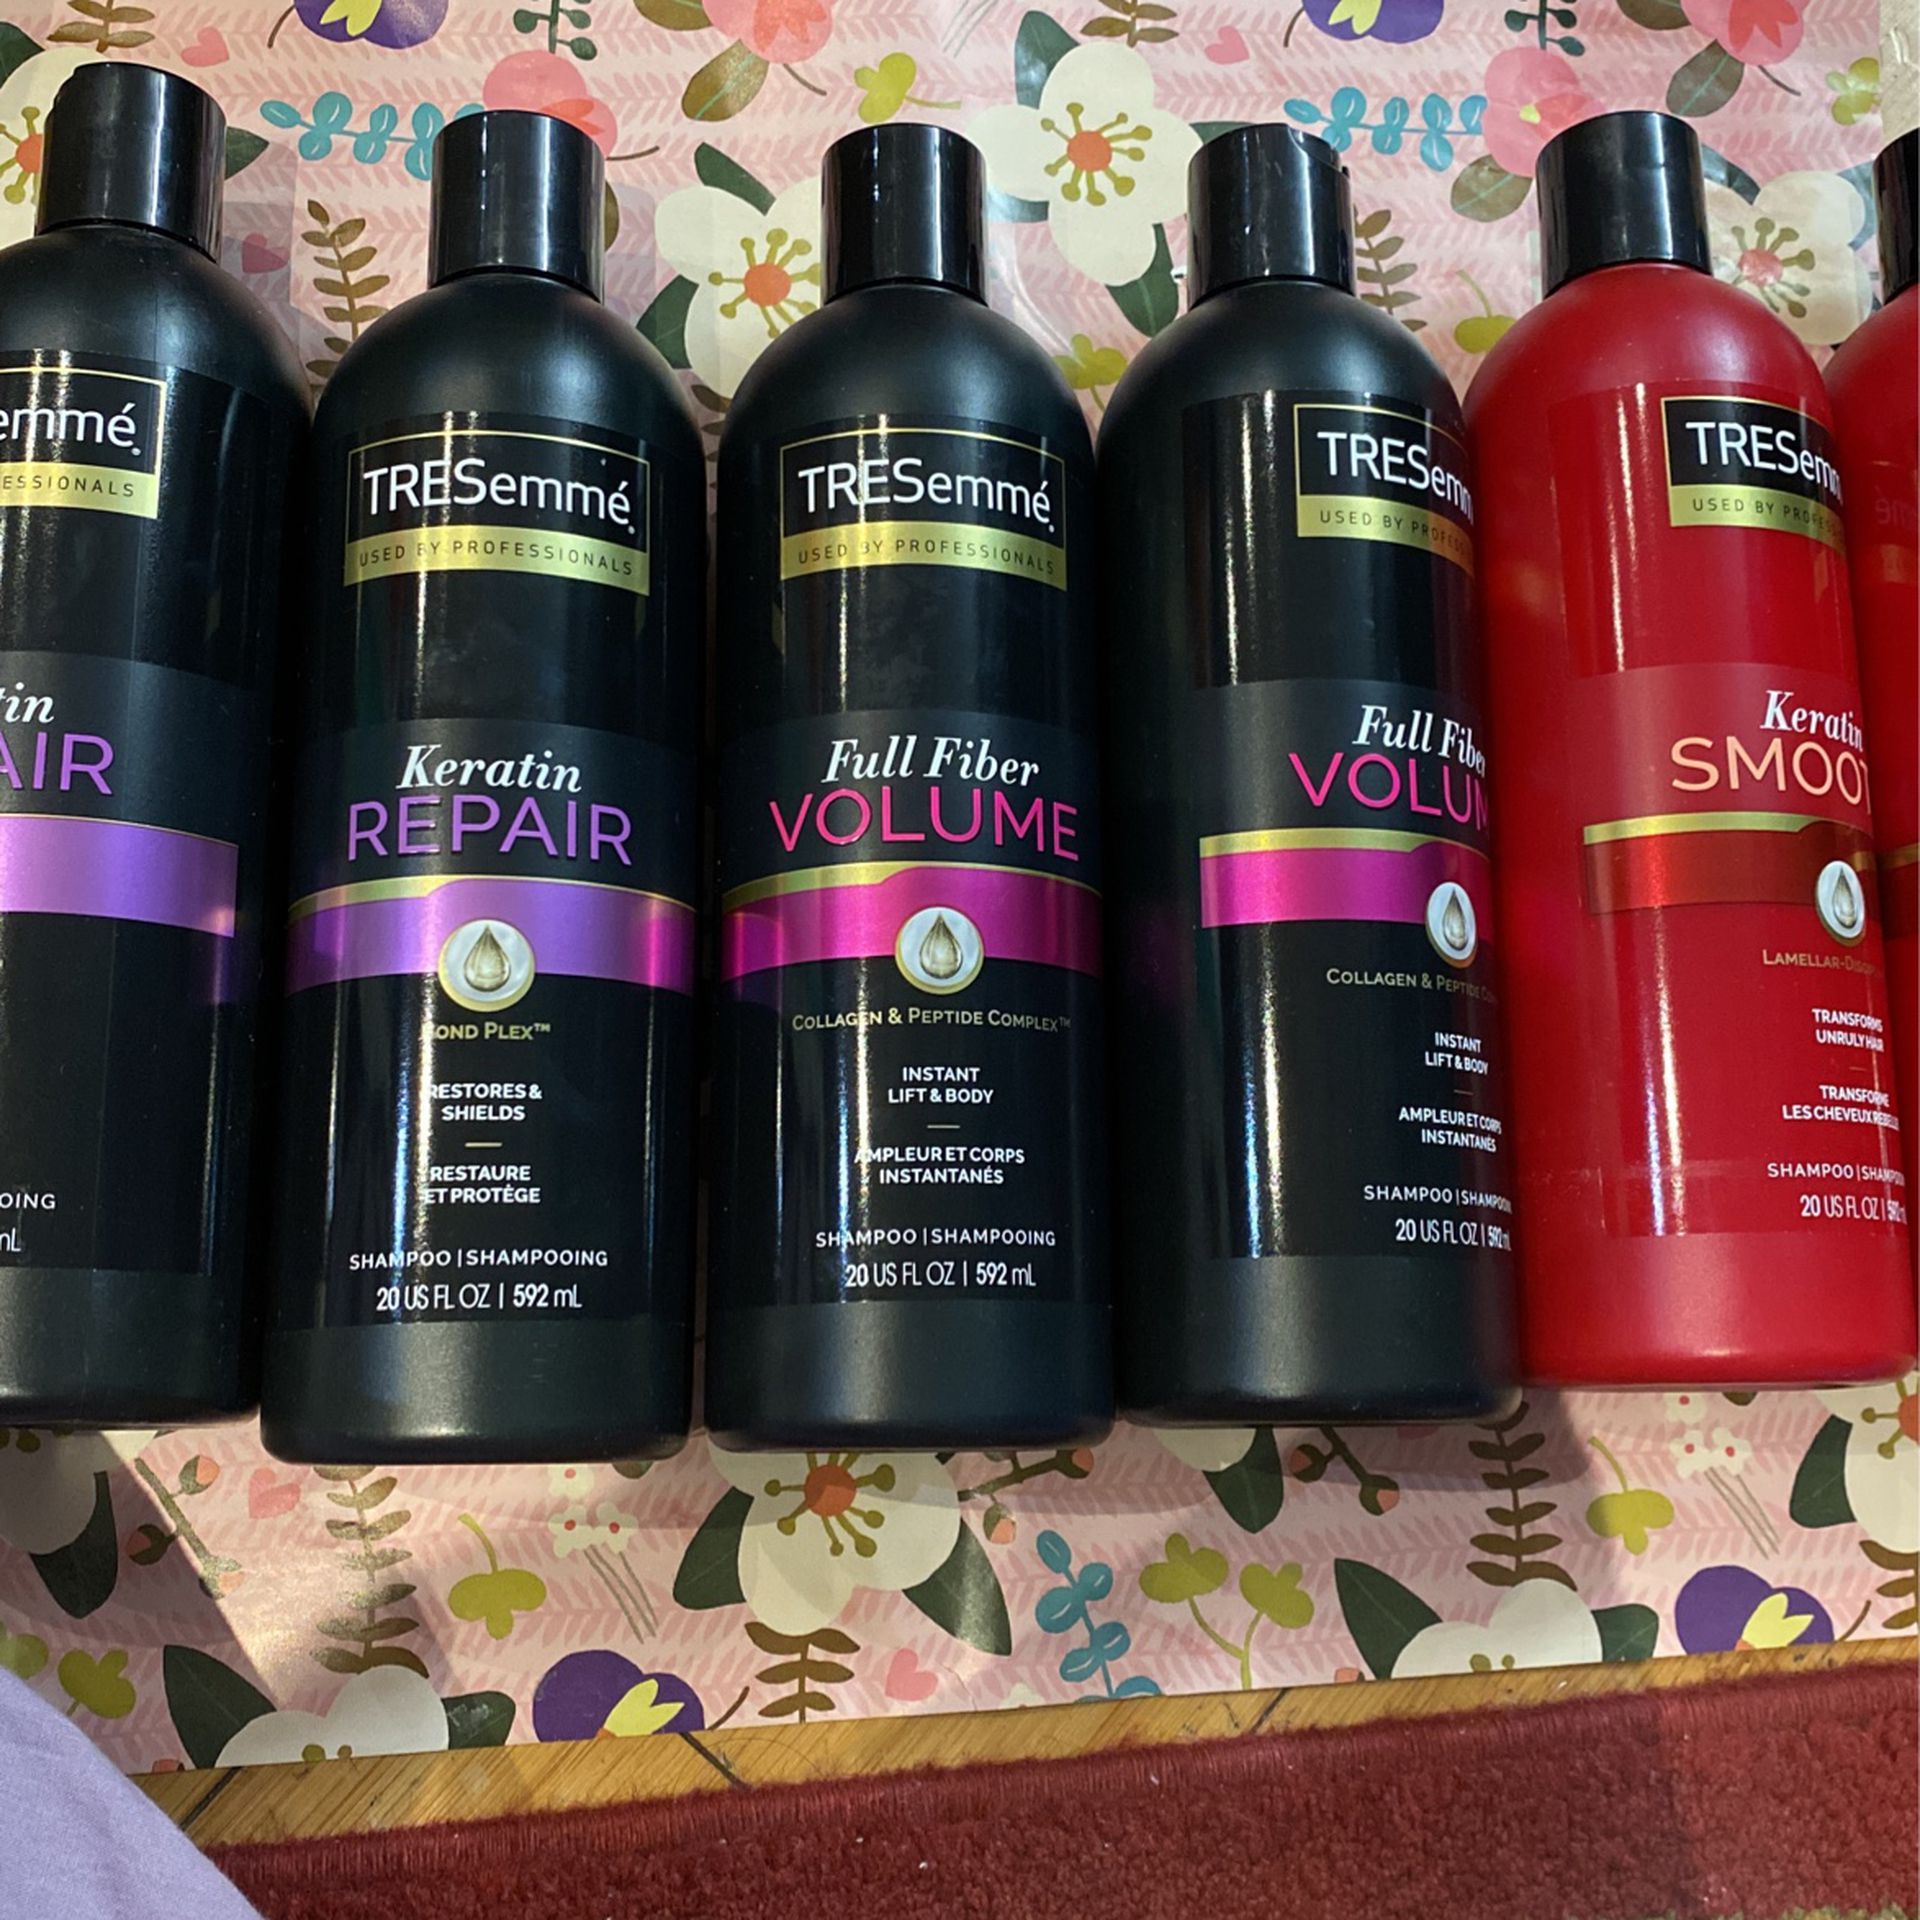 Tresemme Shampoo Lot Of 10 For $40